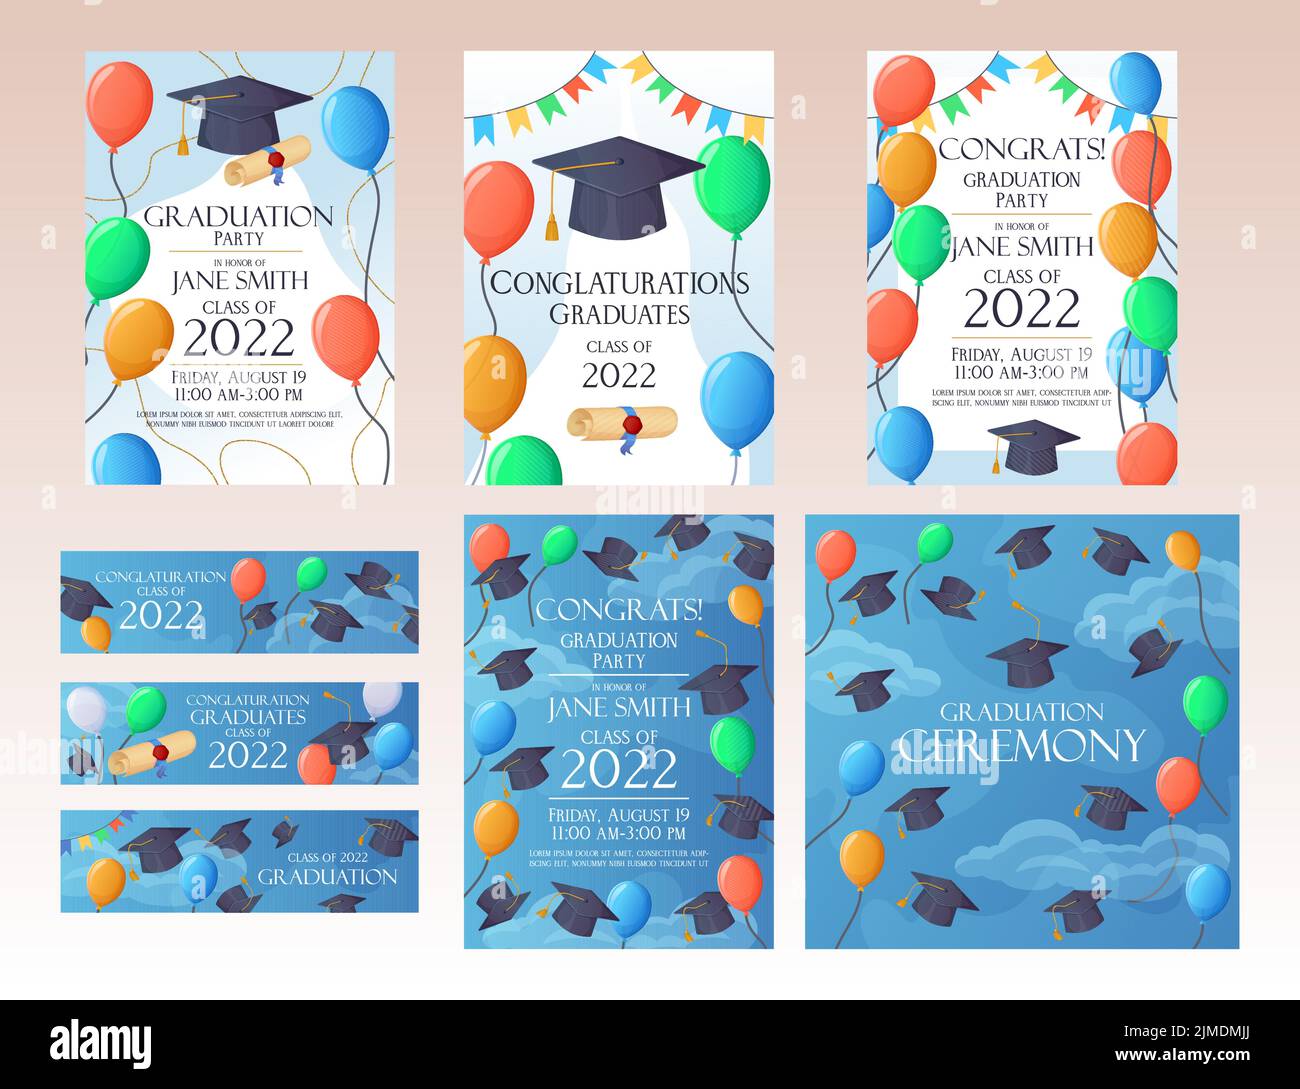 Graduation party invitation cards and banner set 2022 funny card. Sky with balloons. Stock Vector